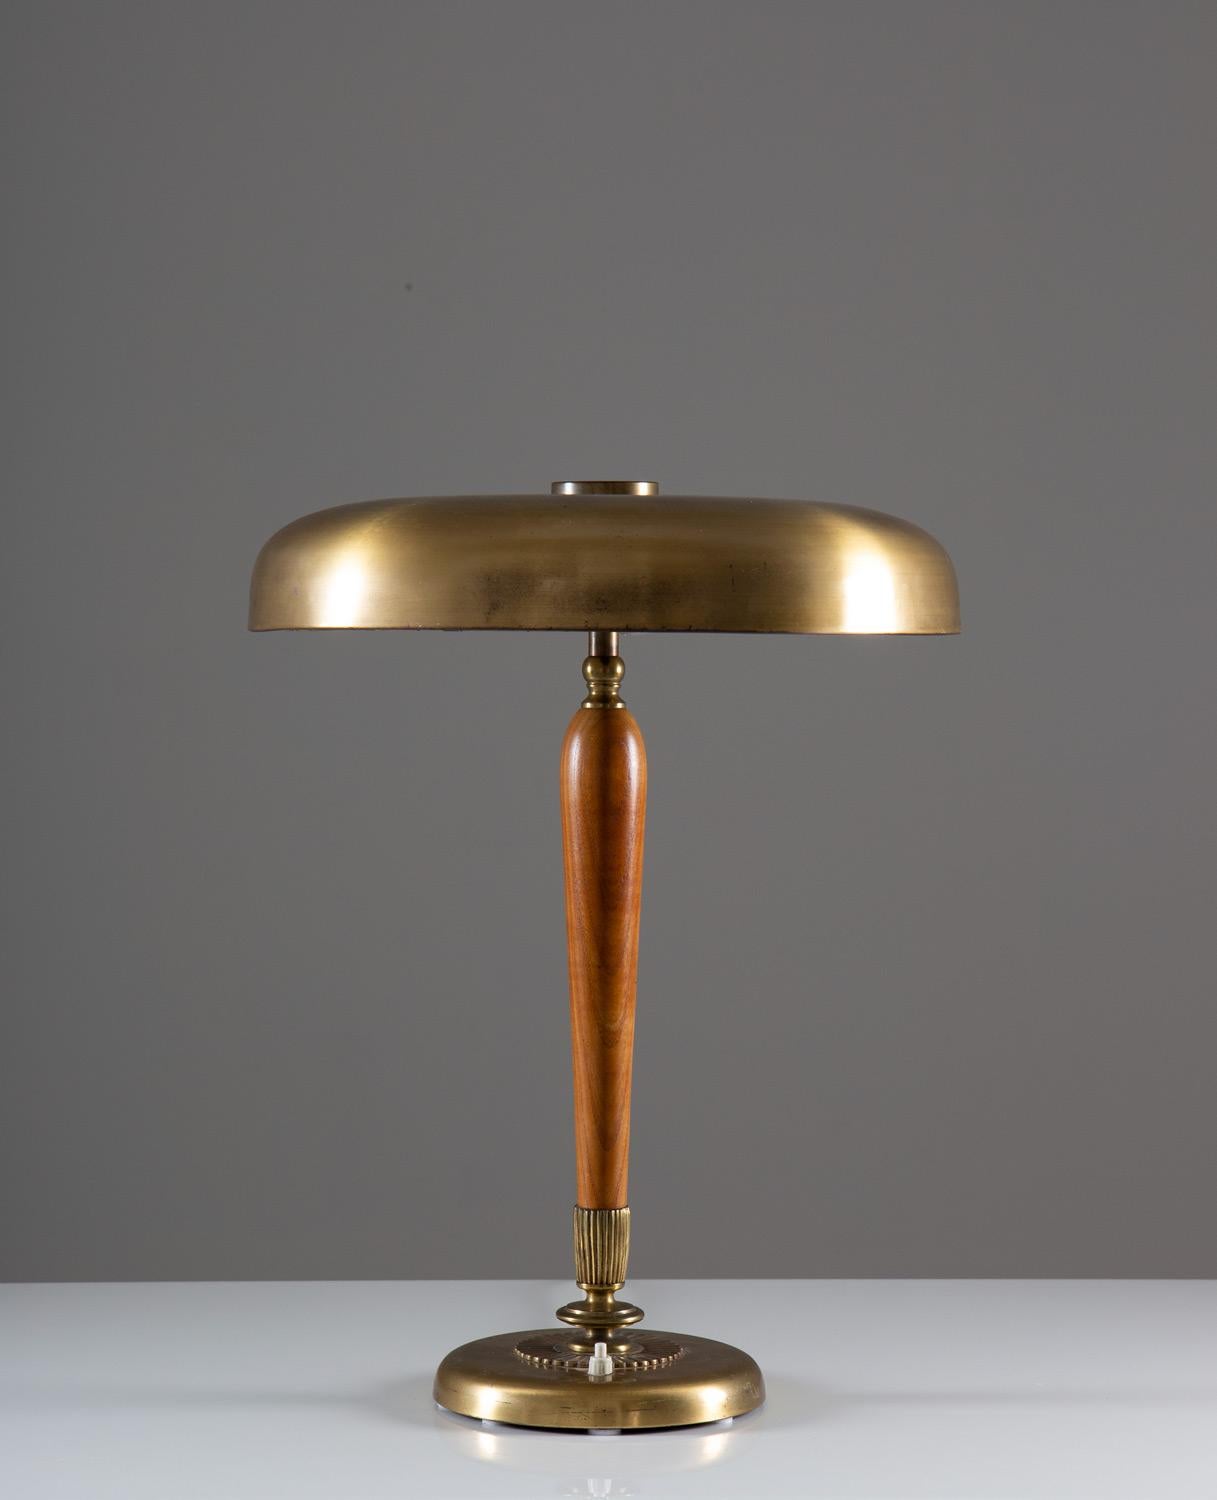 Rare table lamp in brass and wood produced in Sweden, circa 1940.
This elegant lamp was designed during the Swedish Modern era and is made of brass with wooden details. The quality of this lamp is very high and the size is impressive.